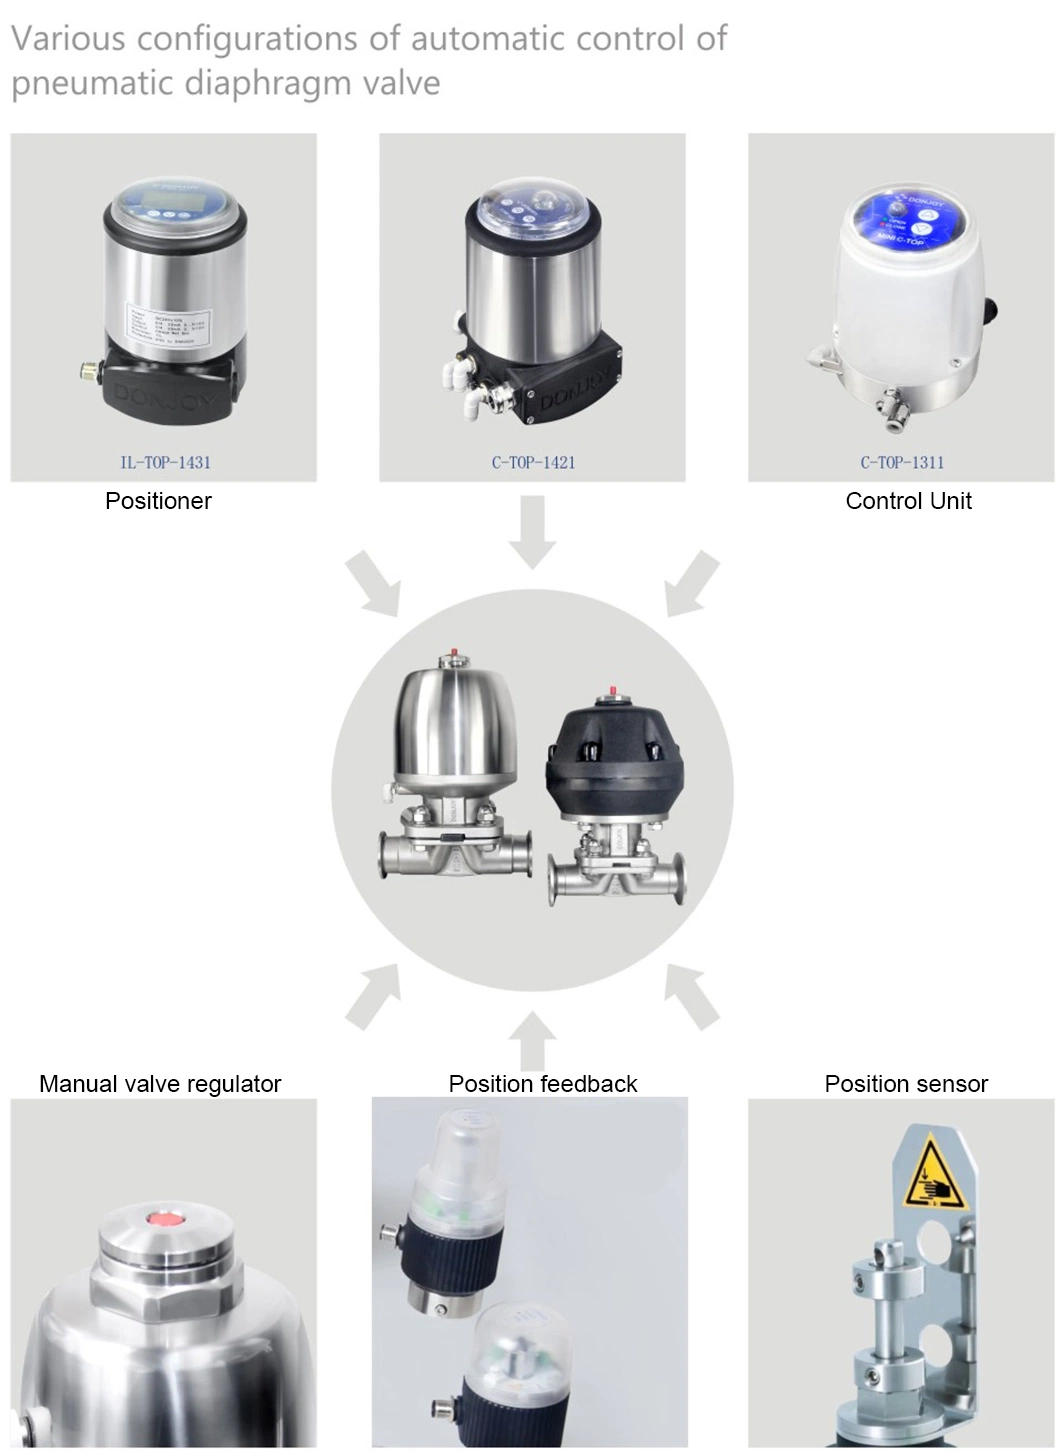 Pharmaceutical Process Control Pneumatically Actuated Diaphragm Valve with Positioner